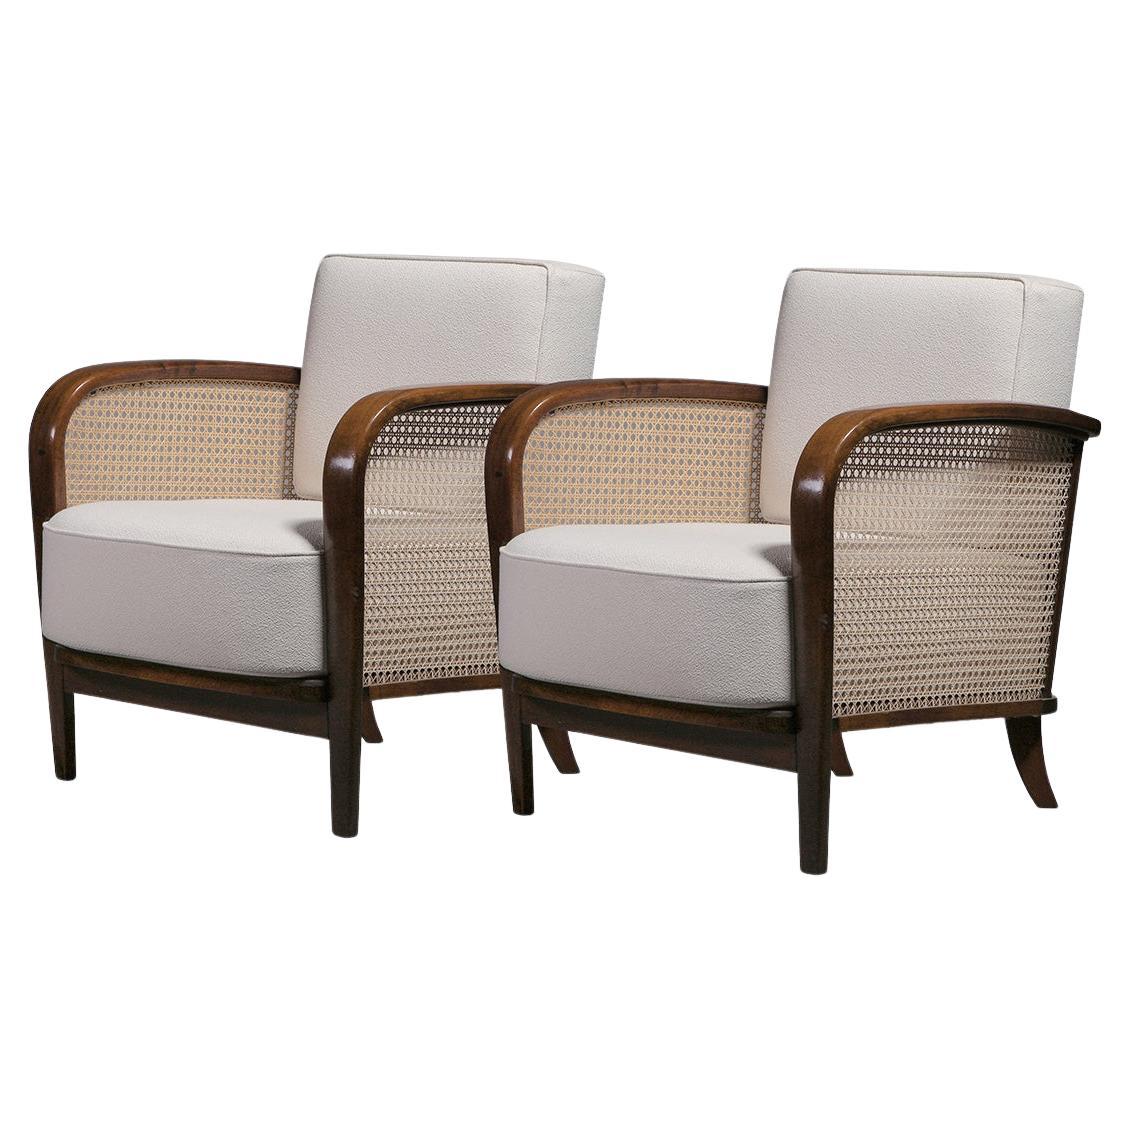 Pair of Jindřich Halabala "H-319" Lounge Chairs in Walnut and Fabric, 1920s For Sale